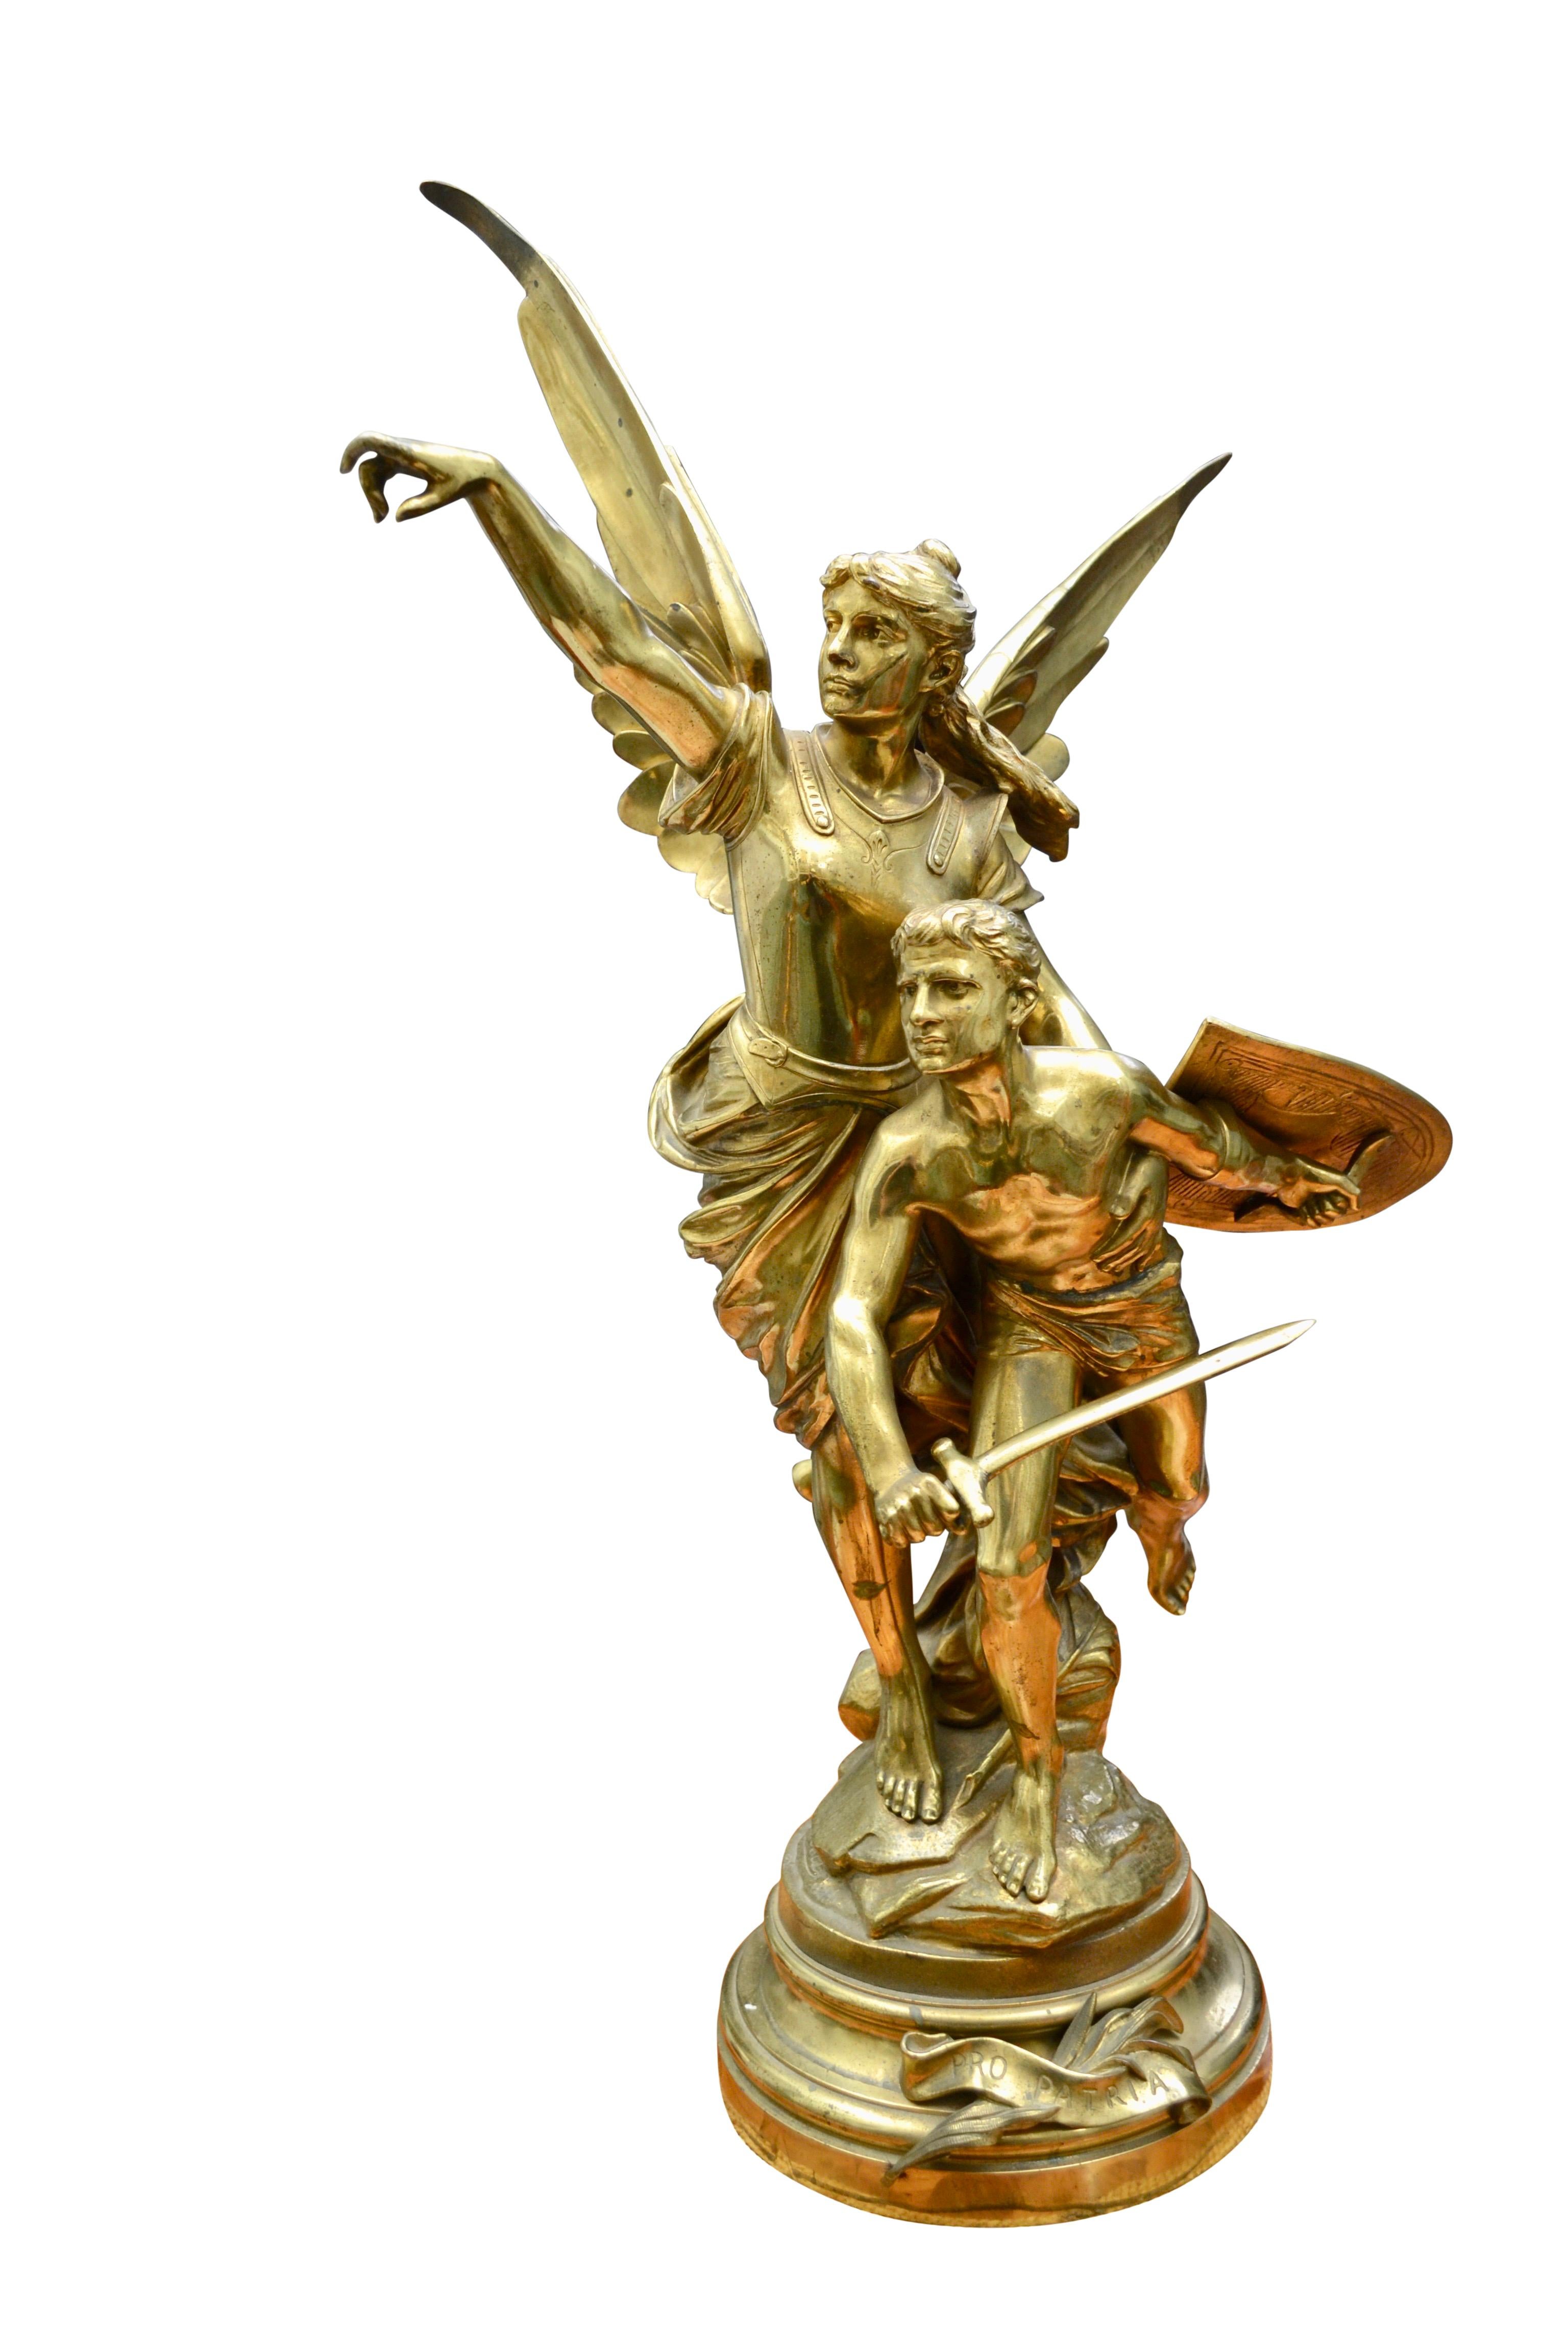 French 19 Century Gilt Bronze Figural Group Titled Pro Patria by Edouard Drouot In Good Condition For Sale In Vancouver, British Columbia